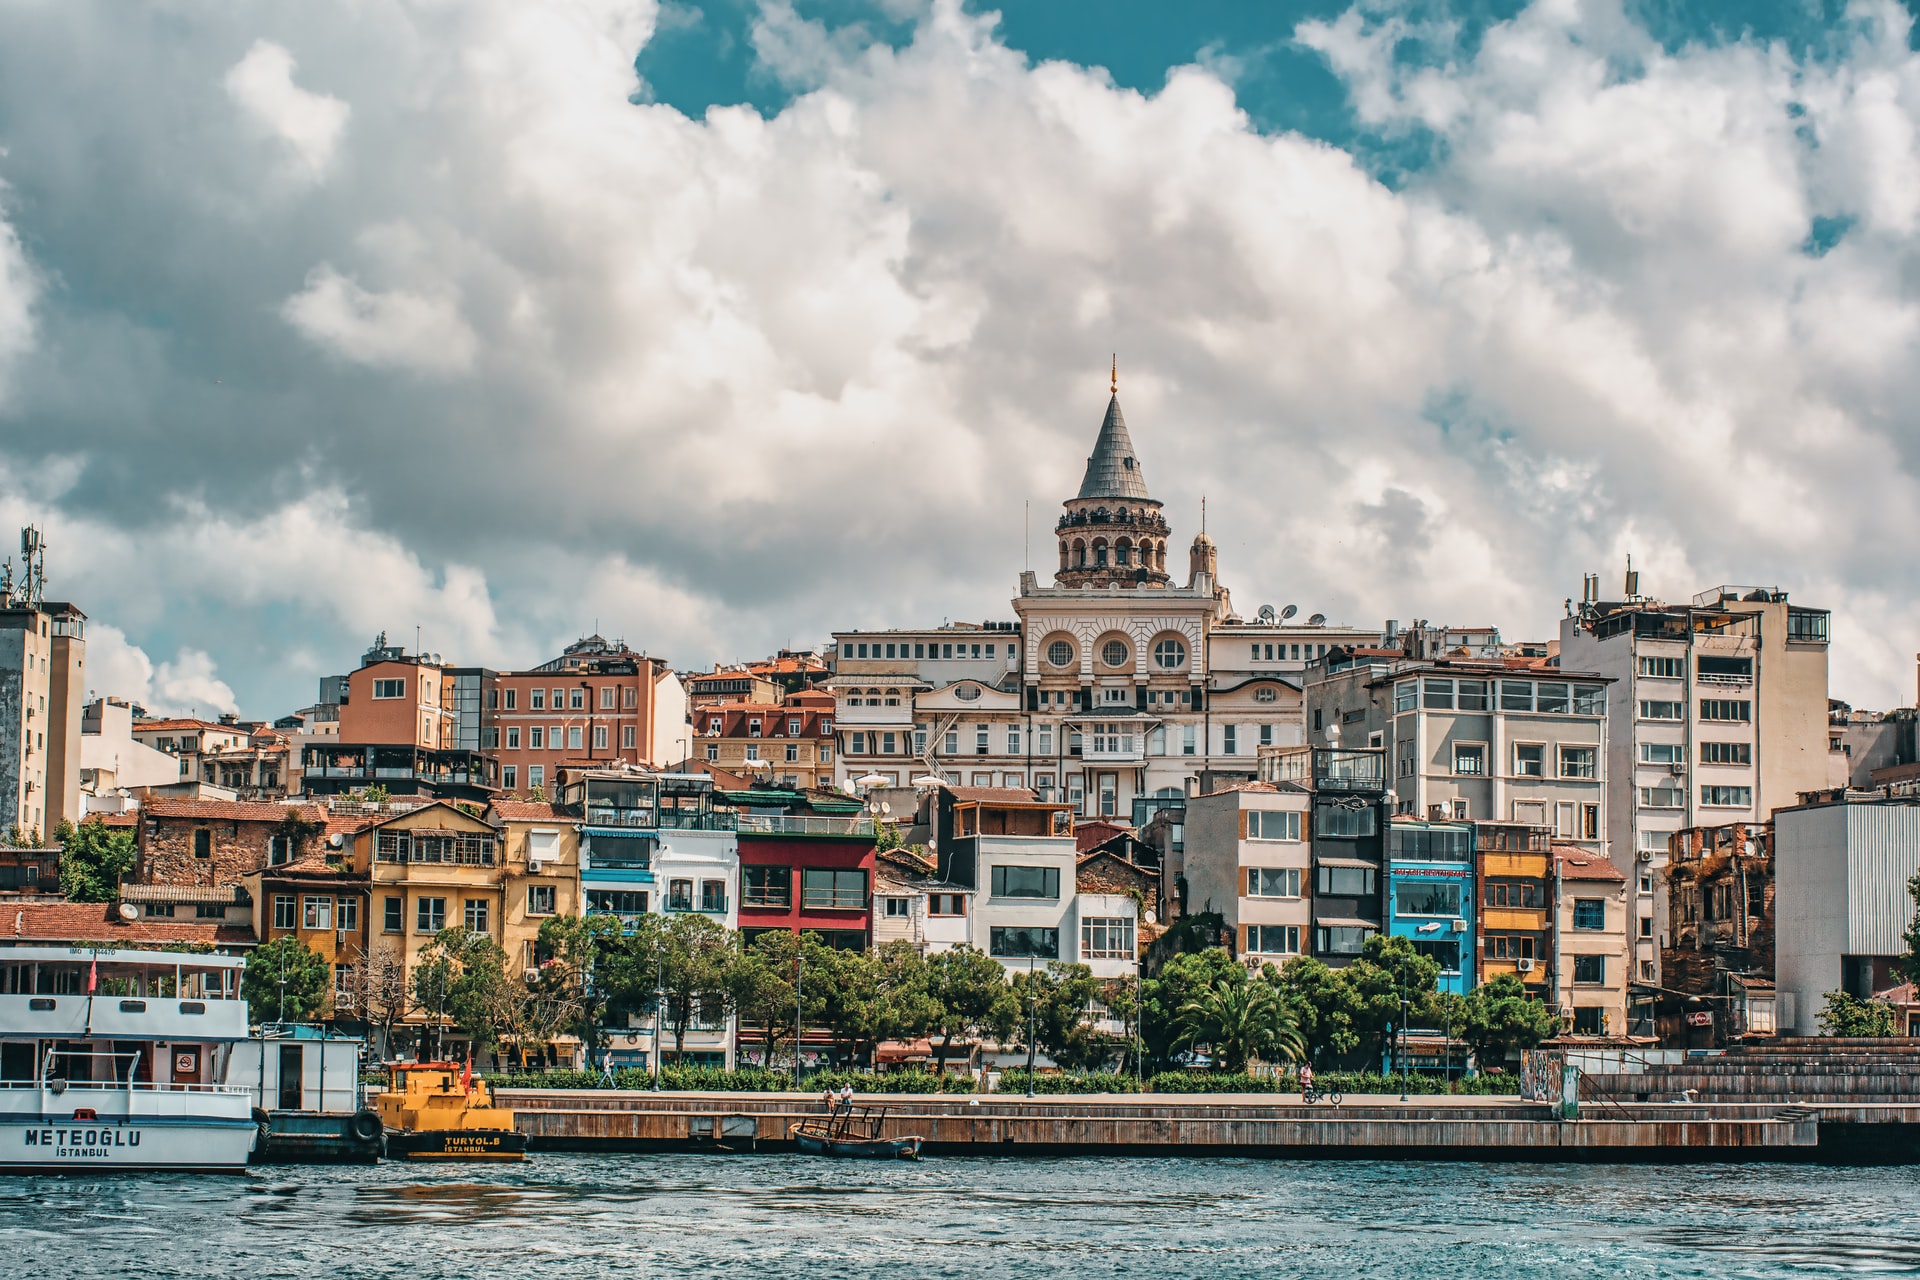 Easily recognisable thanks to its tower, Galata is an exciting area full of small shops, cafés and restaurants